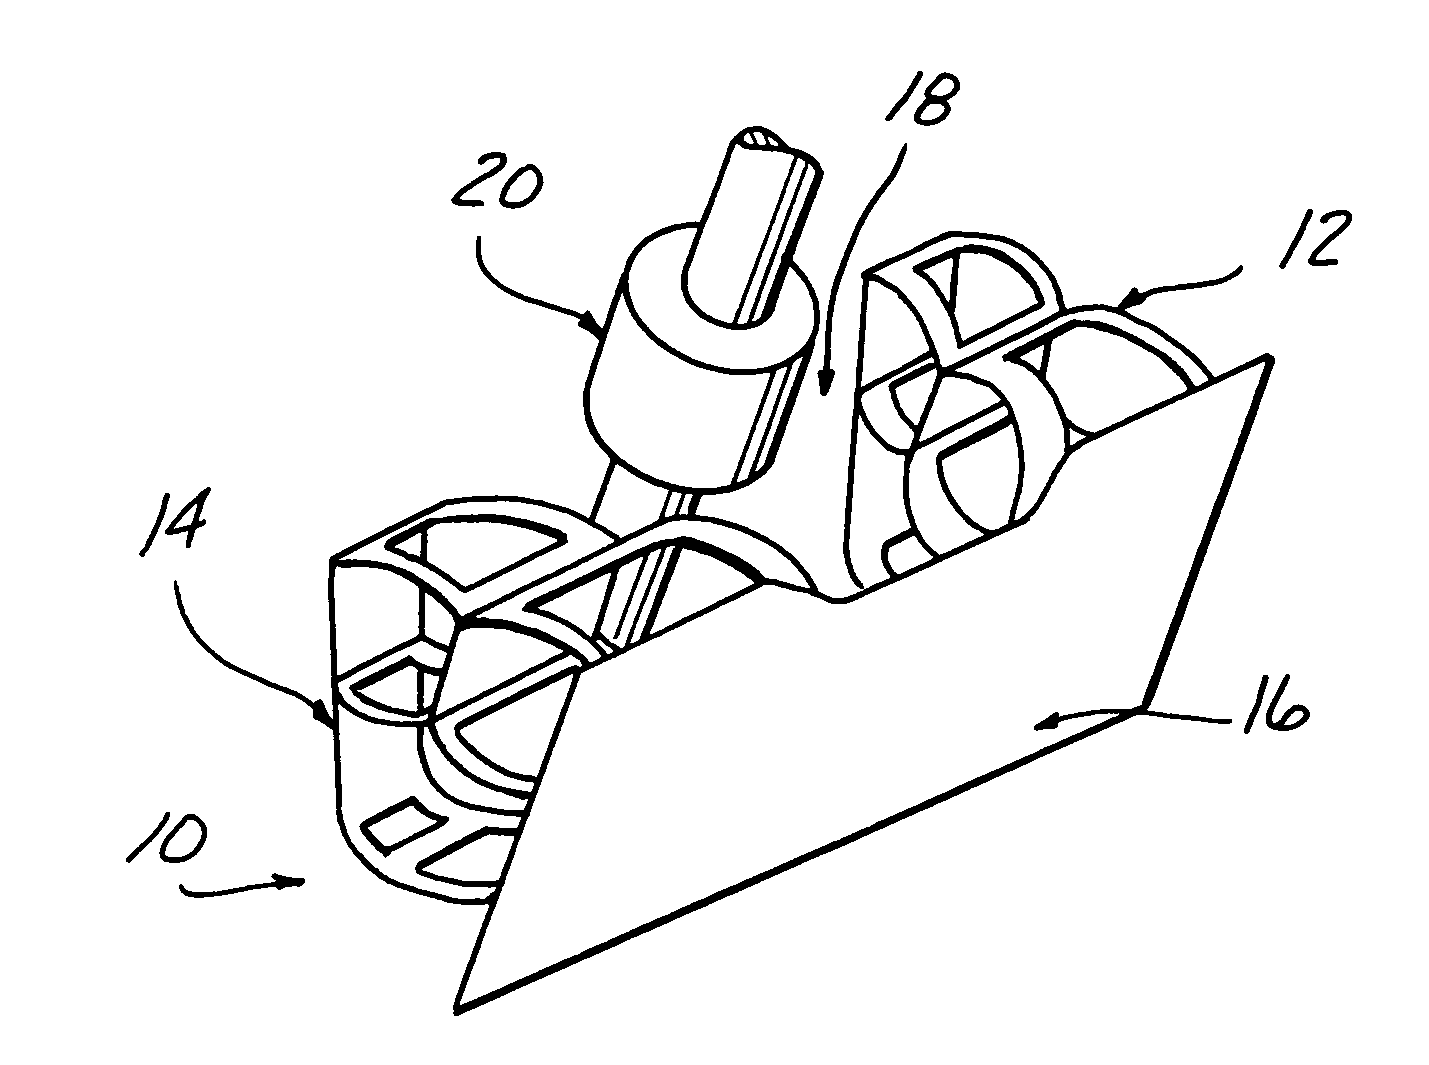 Automotive knee bolster installation and method of construction